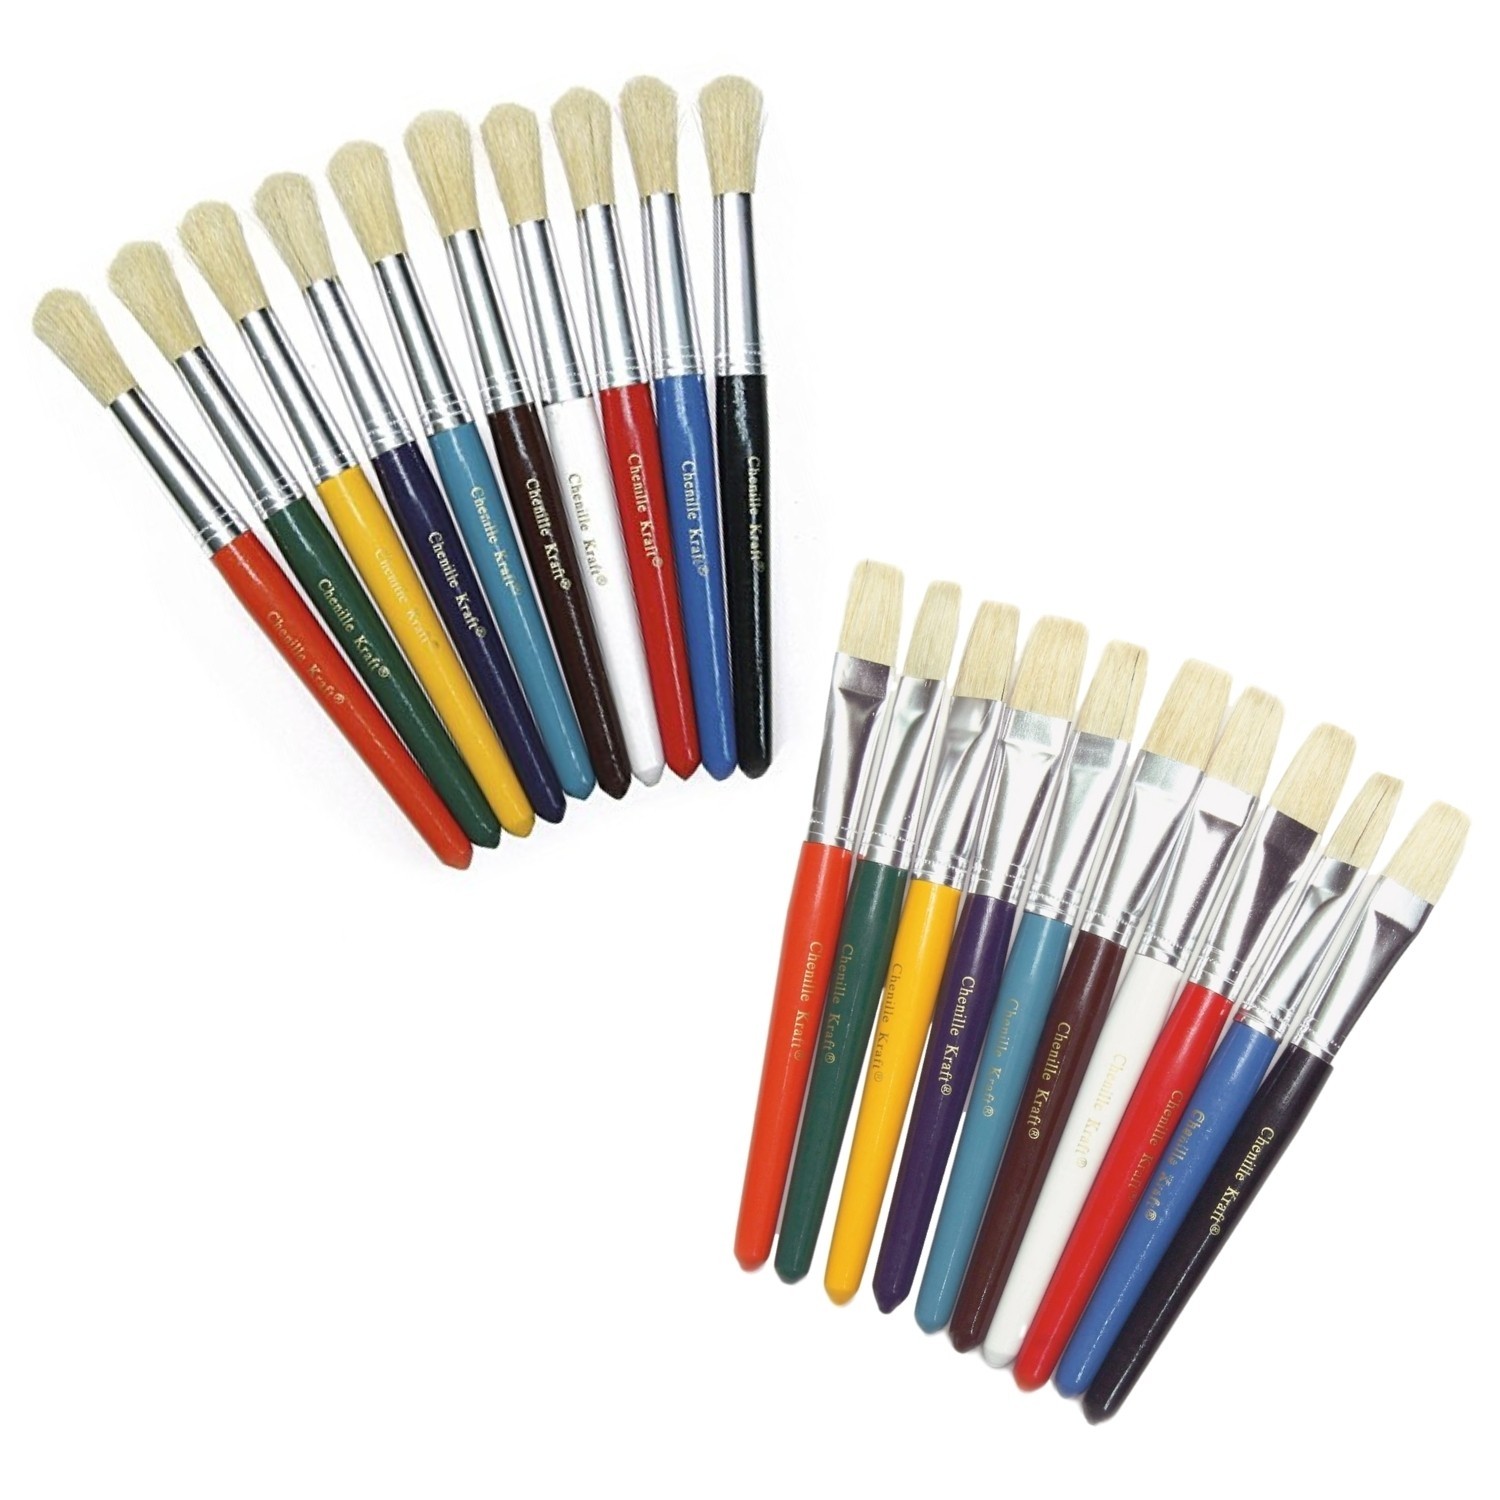 EconoCrafts: Colossal Stubby Paint Brushes